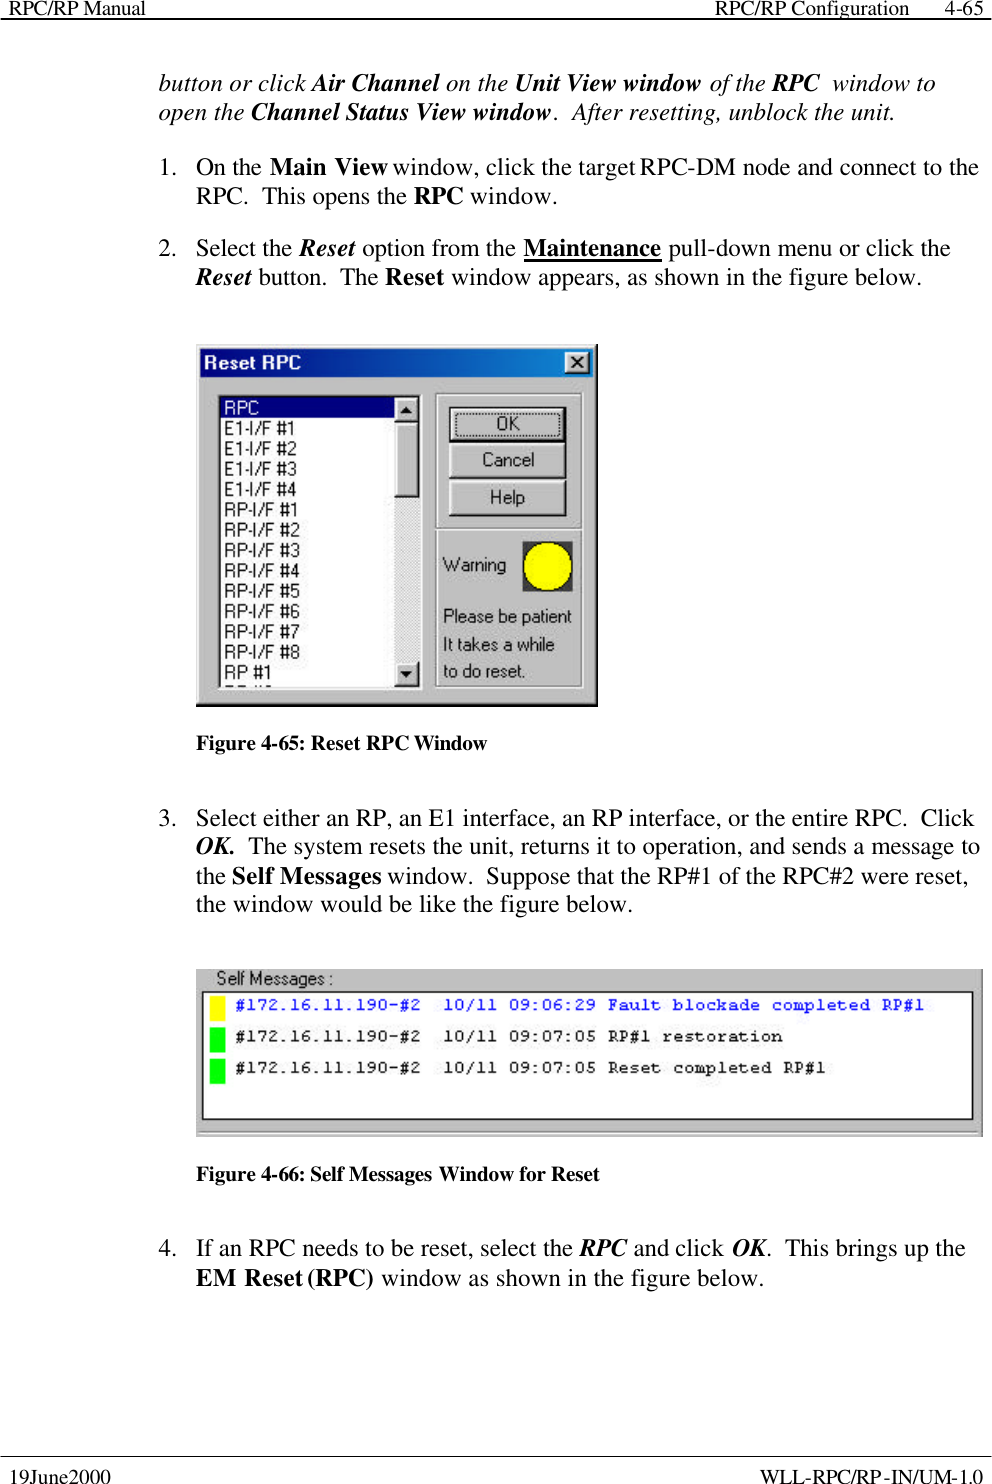 RPC/RP Manual    RPC/RP Configuration 19June2000    WLL-RPC/RP-IN/UM-1.0 4-65button or click Air Channel on the Unit View window of the RPC  window to open the Channel Status View window.  After resetting, unblock the unit. 1.  On the Main View window, click the target RPC-DM node and connect to the RPC.  This opens the RPC window. 2.  Select the Reset option from the Maintenance pull-down menu or click the Reset button.  The Reset window appears, as shown in the figure below.  Figure 4-65: Reset RPC Window 3.  Select either an RP, an E1 interface, an RP interface, or the entire RPC.  Click OK.  The system resets the unit, returns it to operation, and sends a message to the Self Messages window.  Suppose that the RP#1 of the RPC#2 were reset, the window would be like the figure below.  Figure 4-66: Self Messages Window for Reset 4.  If an RPC needs to be reset, select the RPC and click OK.  This brings up the EM Reset (RPC) window as shown in the figure below. 